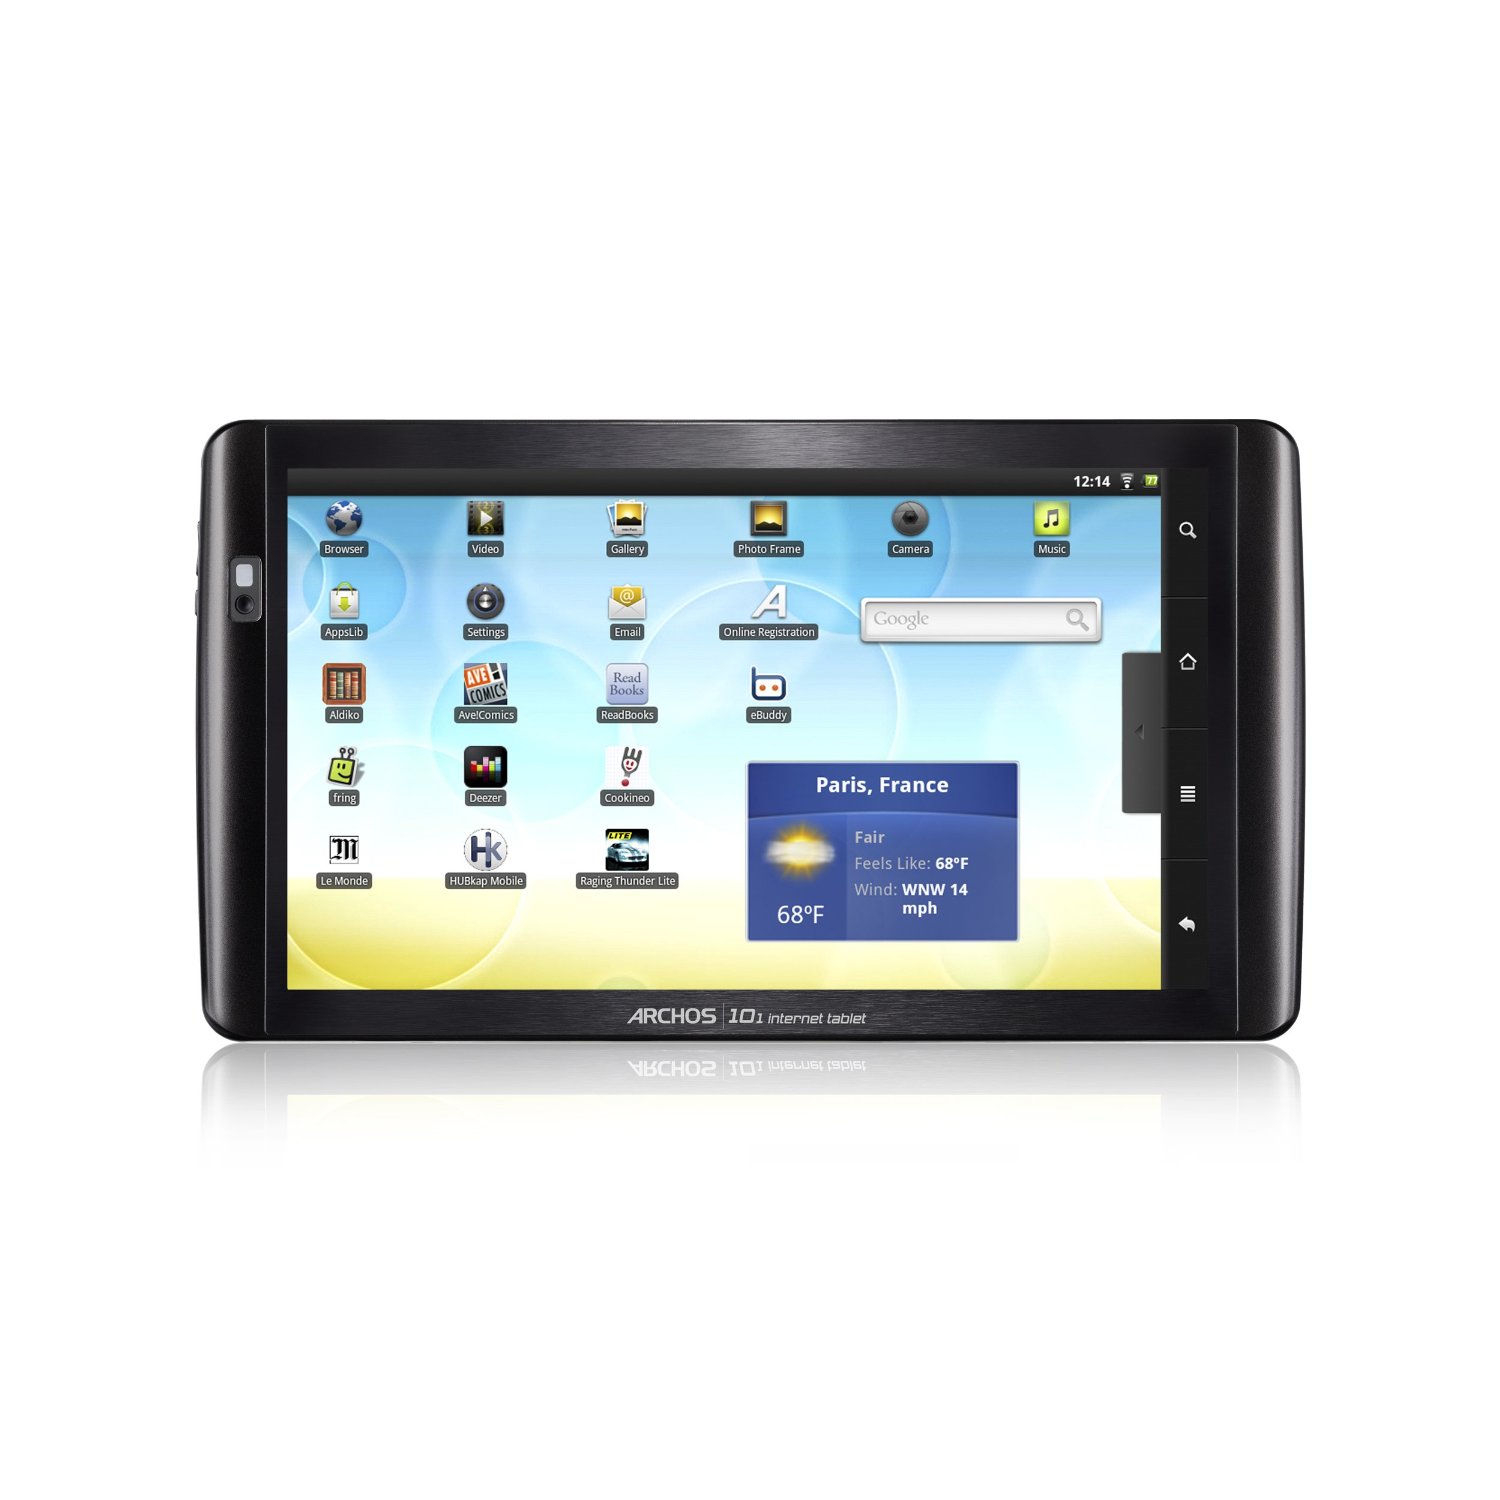 http://thetechjournal.com/wp-content/uploads/images/1110/1318017670-archos-101-android-powered-internet-tablet-1.jpg